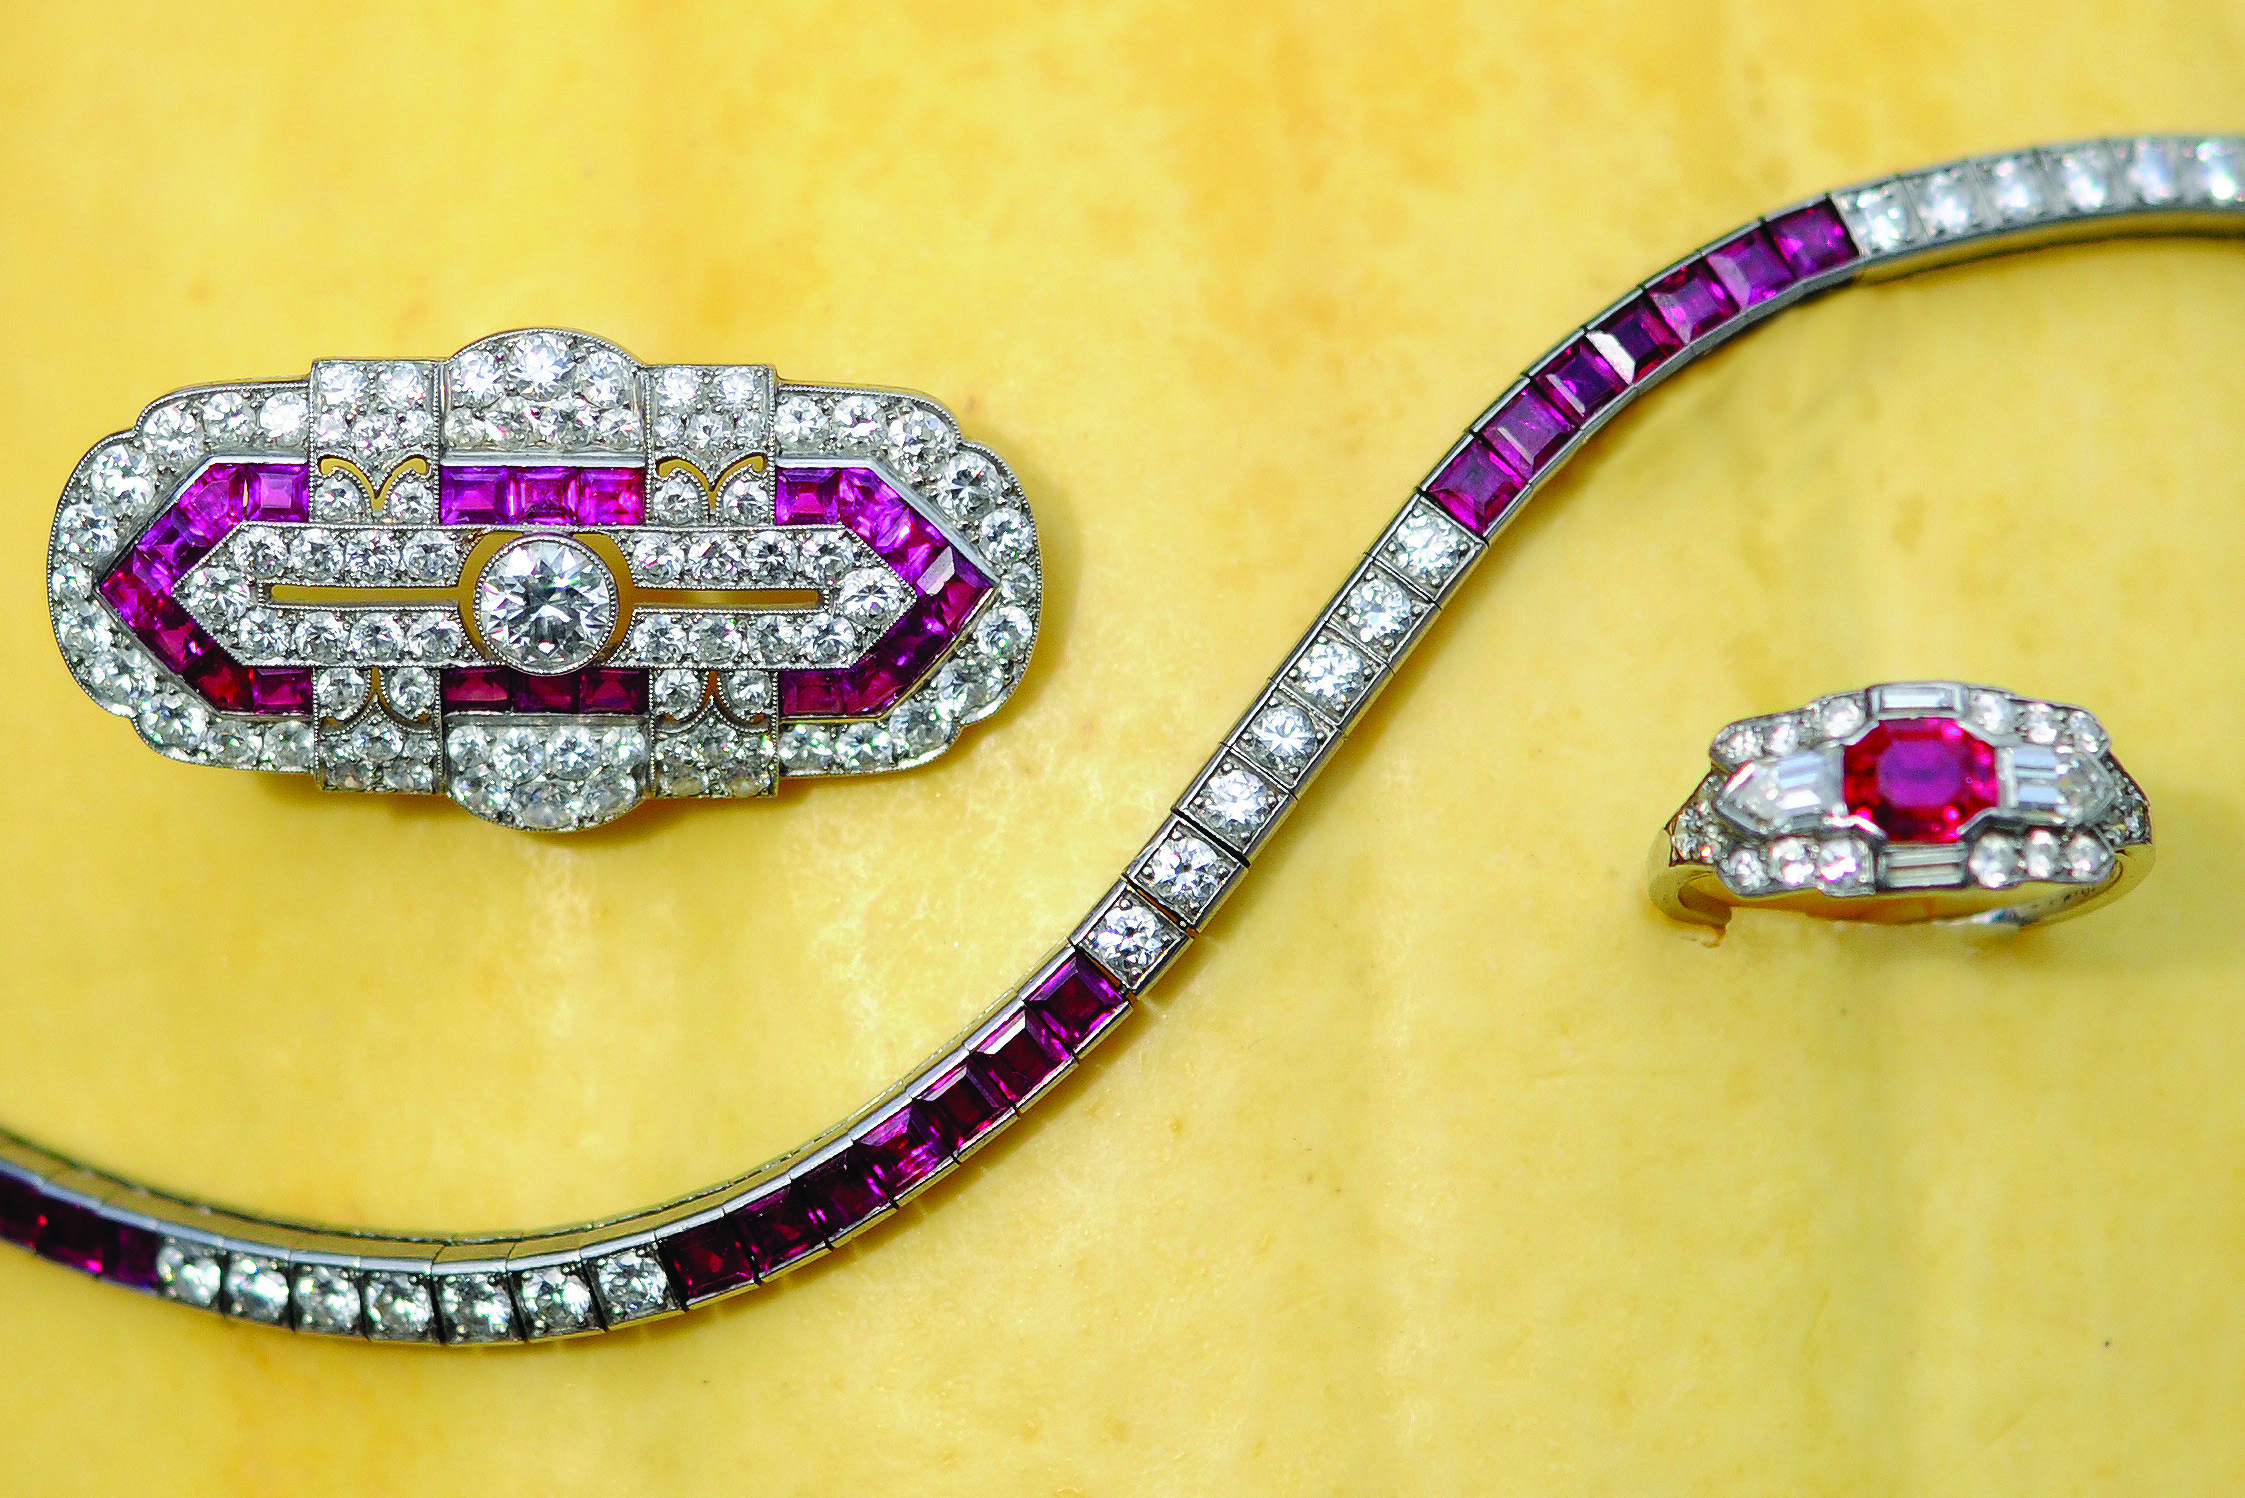 Vintage Art Deco diamond and ruby jewelry by Tiffany and Co